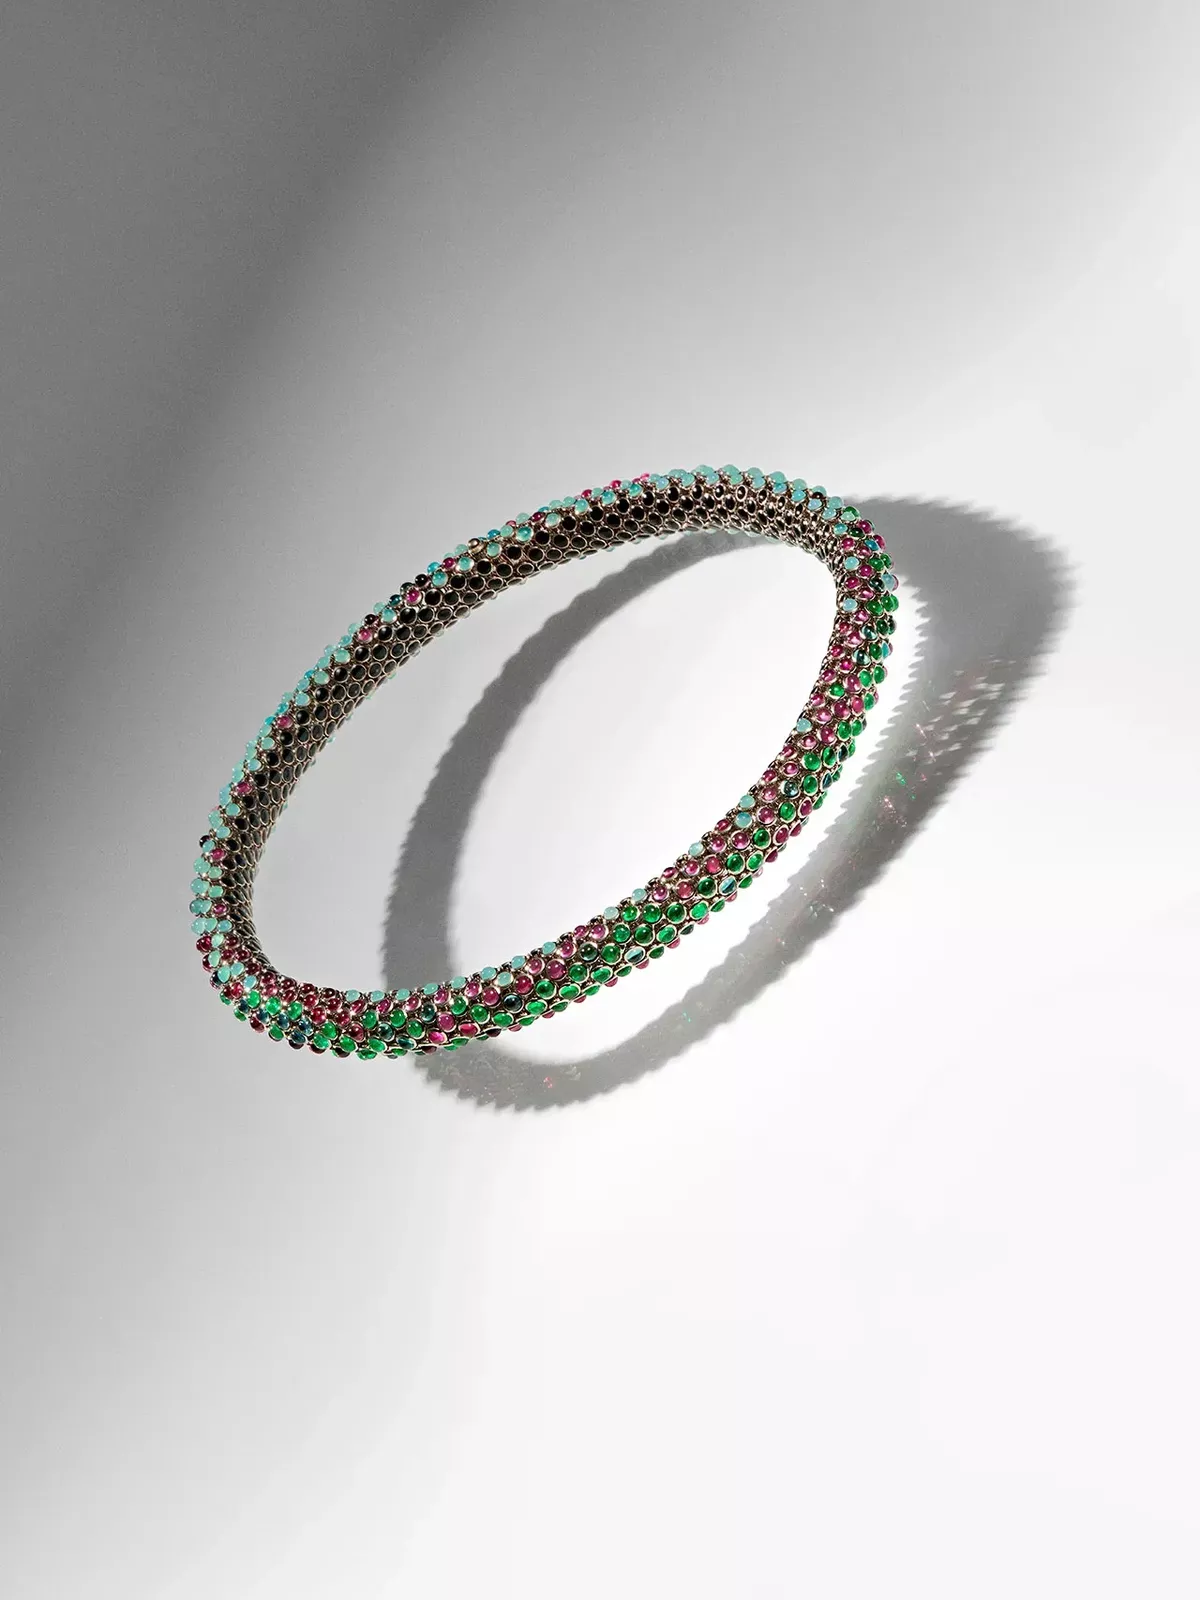 The finished Cartier necklace, inspired by the “magical, colourful” world of Wonka.